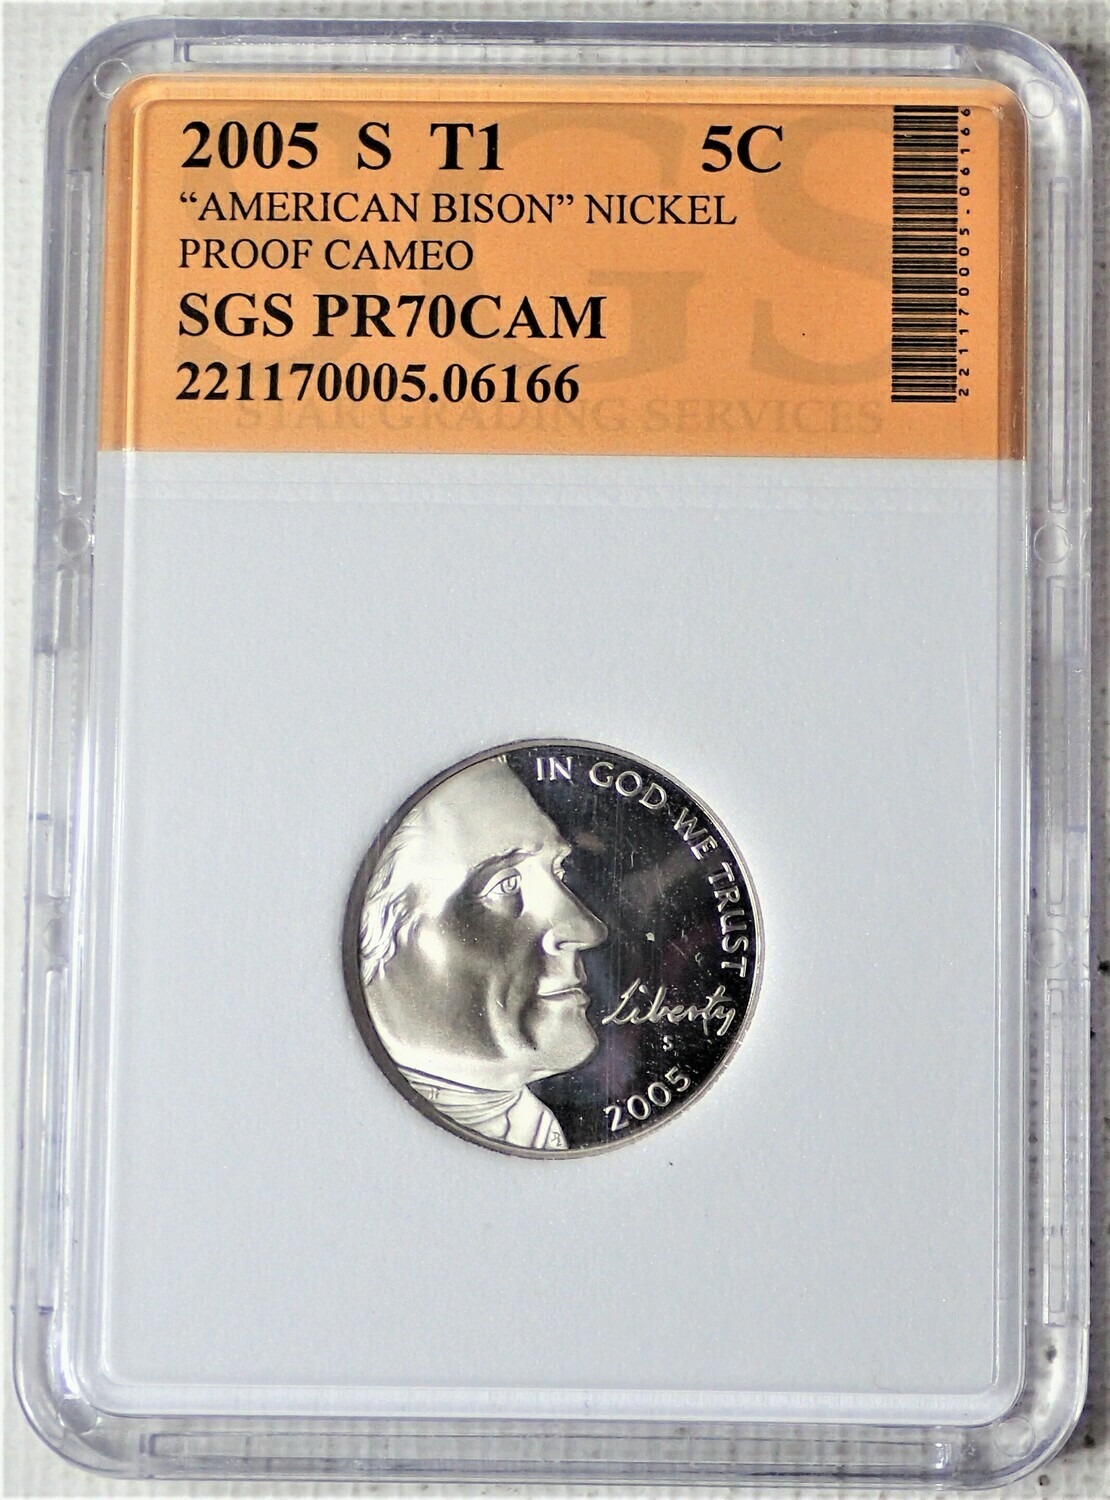 2005 S JEFFERSON NICKEL TYPE 1 AMERICAN BISON (PROOF CAMEO) SGS 06166